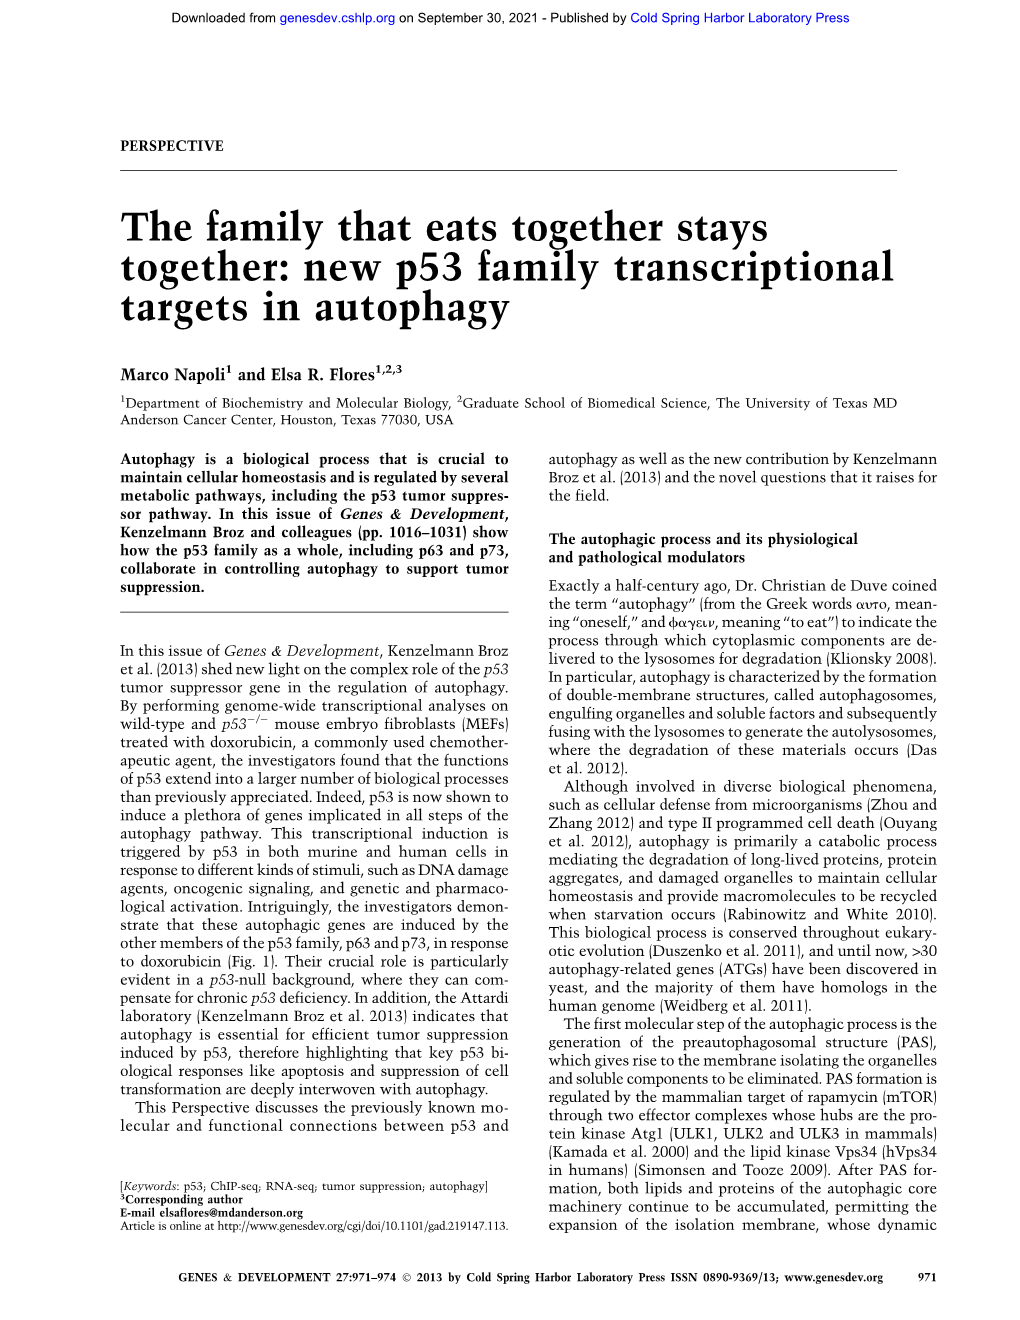 New P53 Family Transcriptional Targets in Autophagy